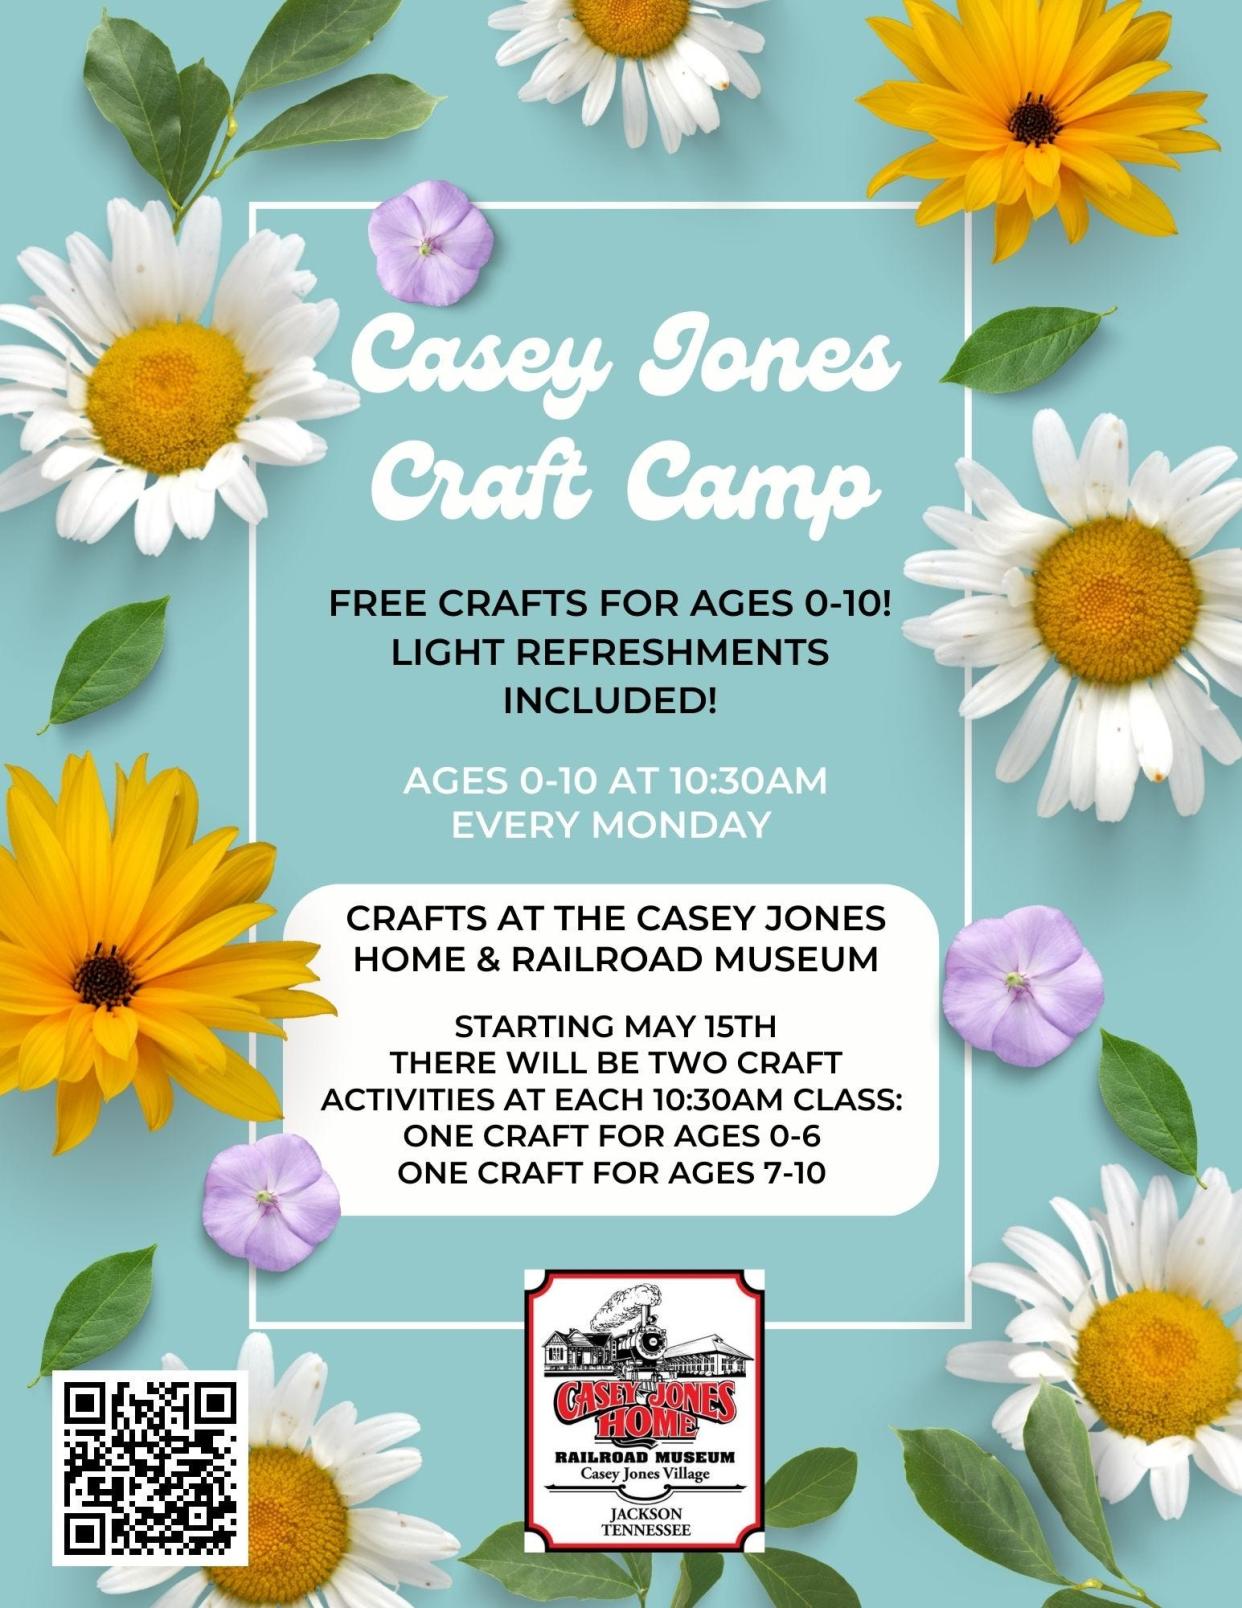 Casey Jones Home & Railroad Museum will feature craft camps for ages 0-10.